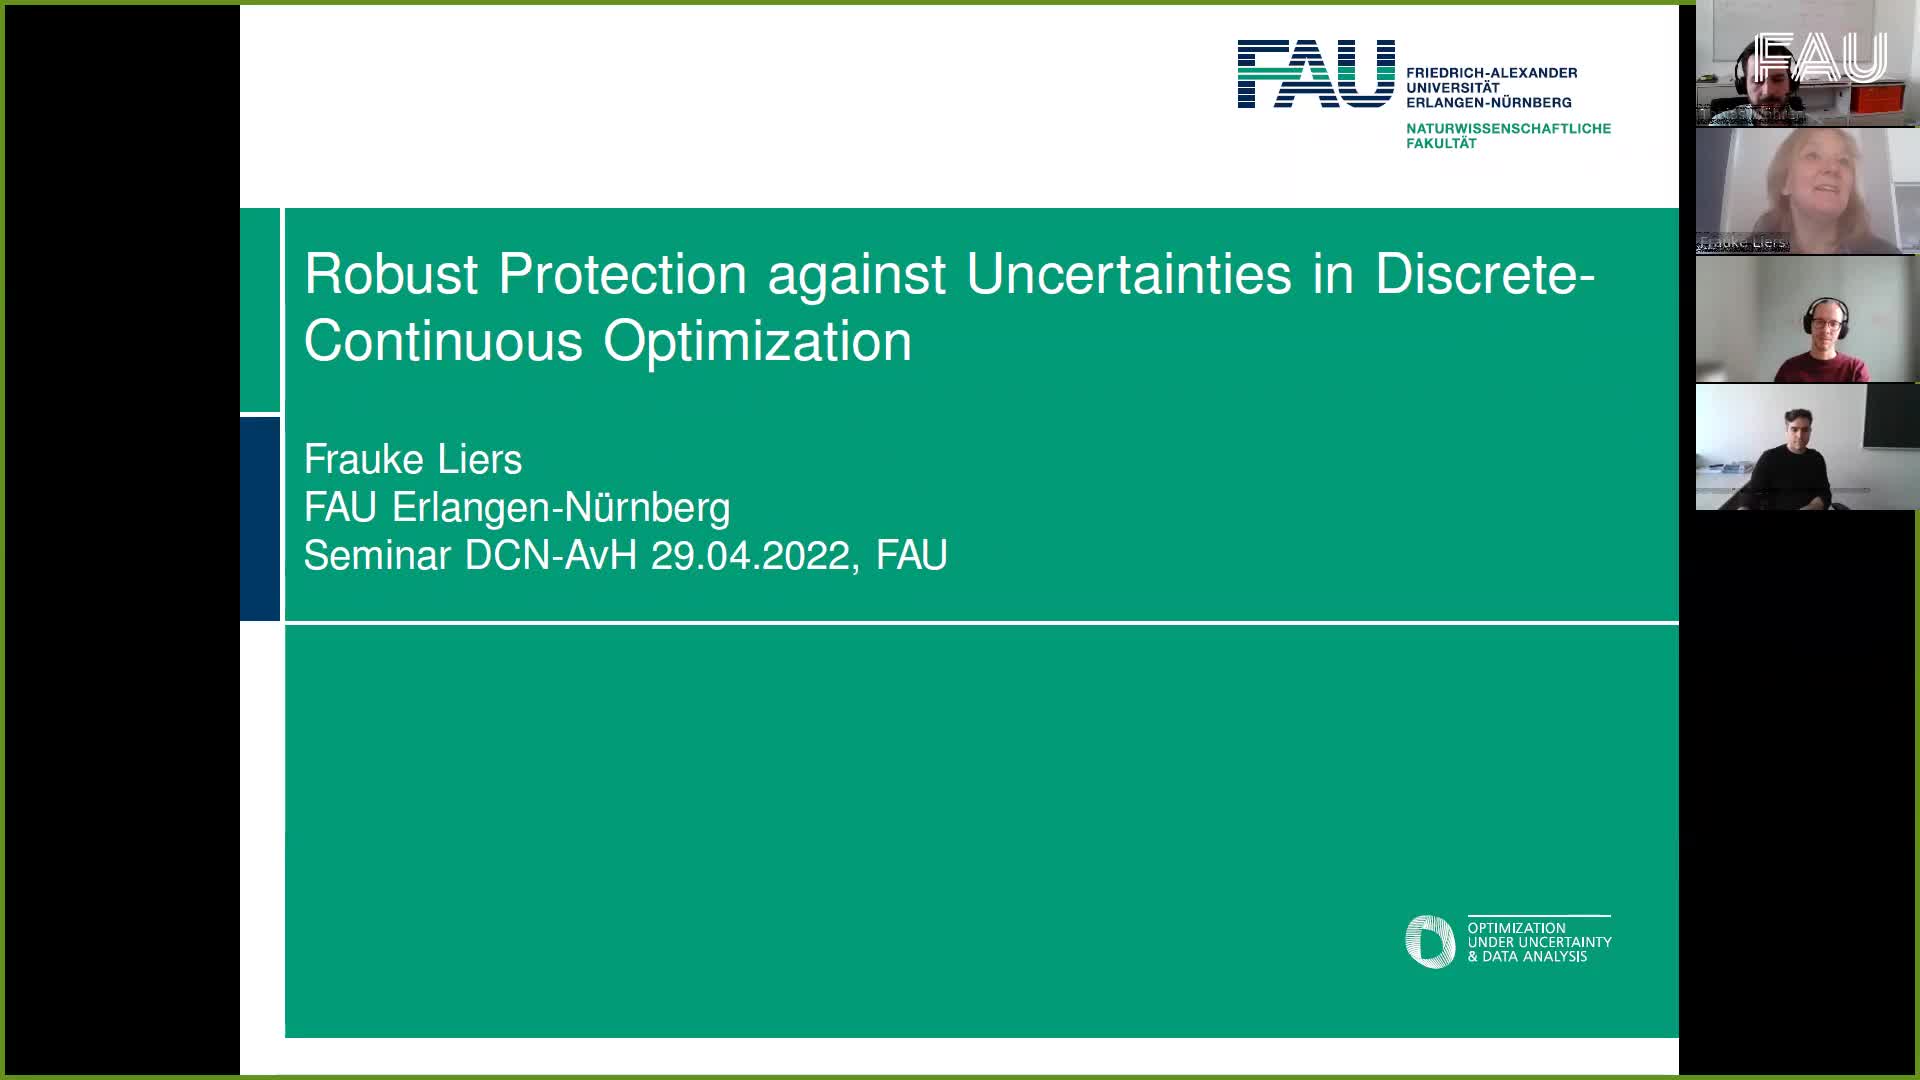 Robust Protection against Uncertainties in Discrete-Continuous Optimization (Frauke Liers, FAU) preview image